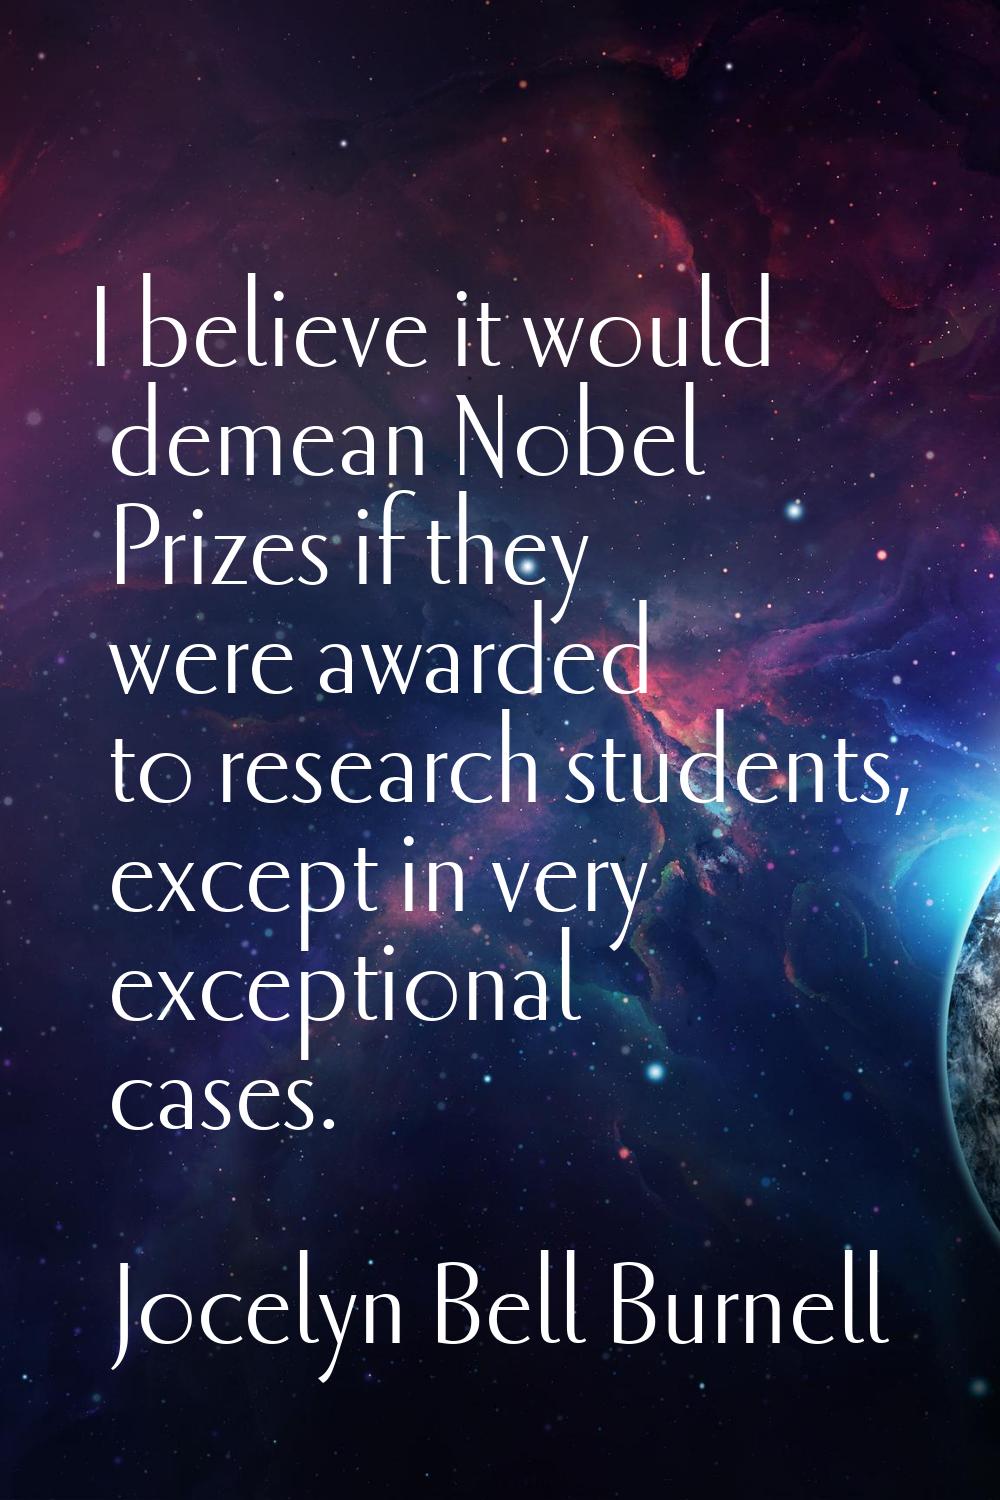 I believe it would demean Nobel Prizes if they were awarded to research students, except in very ex